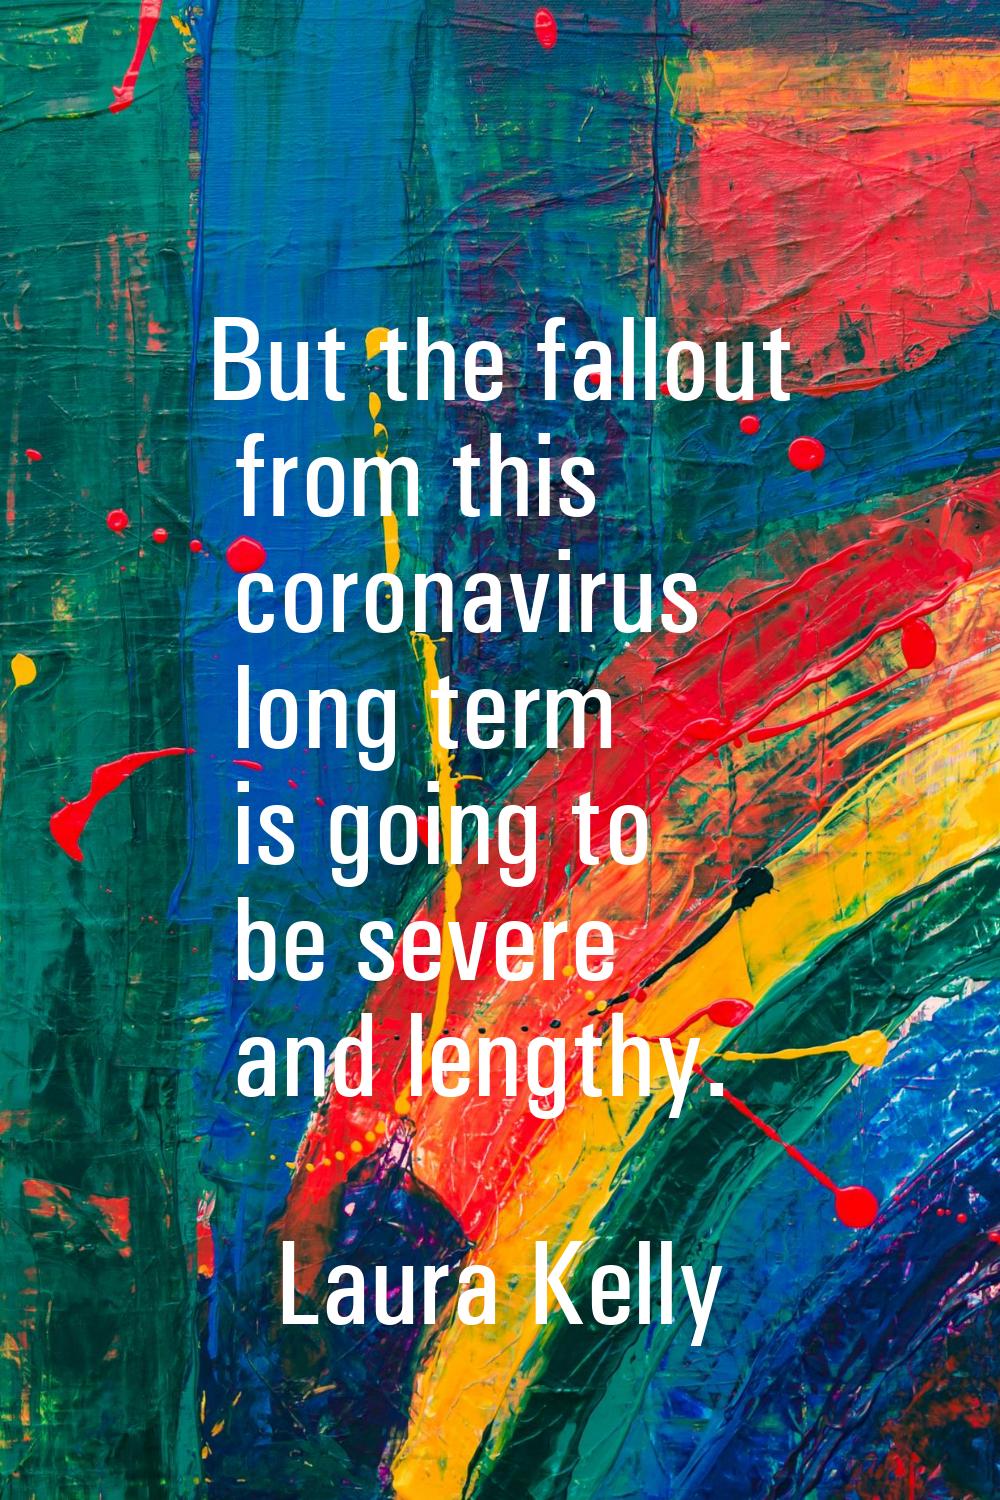 But the fallout from this coronavirus long term is going to be severe and lengthy.